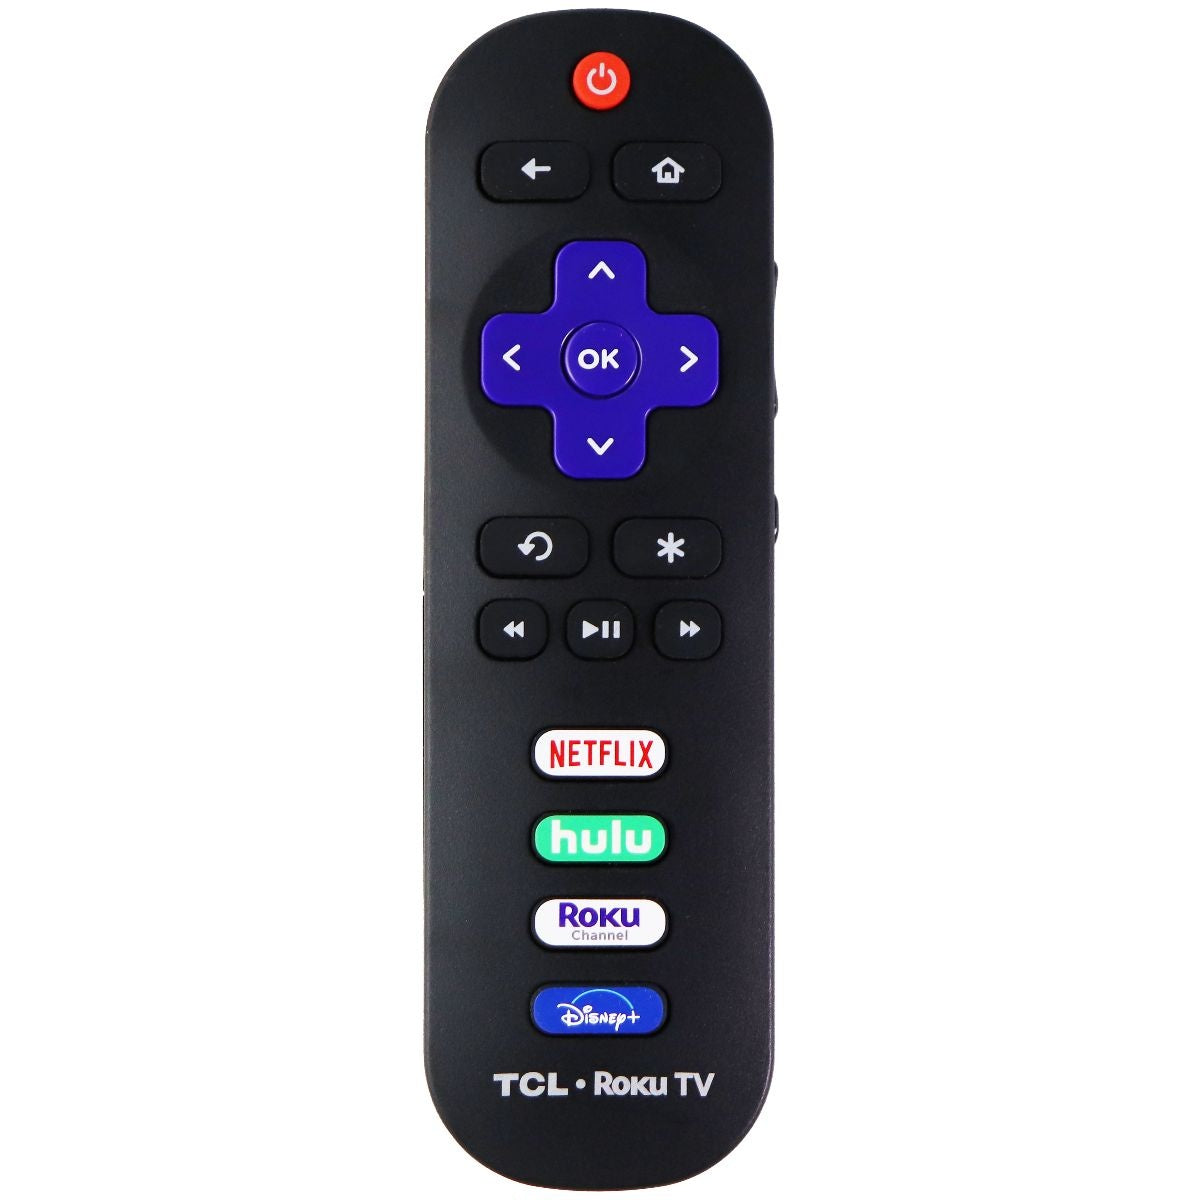 TCL Remote Control (TCLRMTSC201) w/ Netflix/Hulu/Disney+ Keys for TVs - Black TV, Video & Audio Accessories - Remote Controls TCL    - Simple Cell Bulk Wholesale Pricing - USA Seller